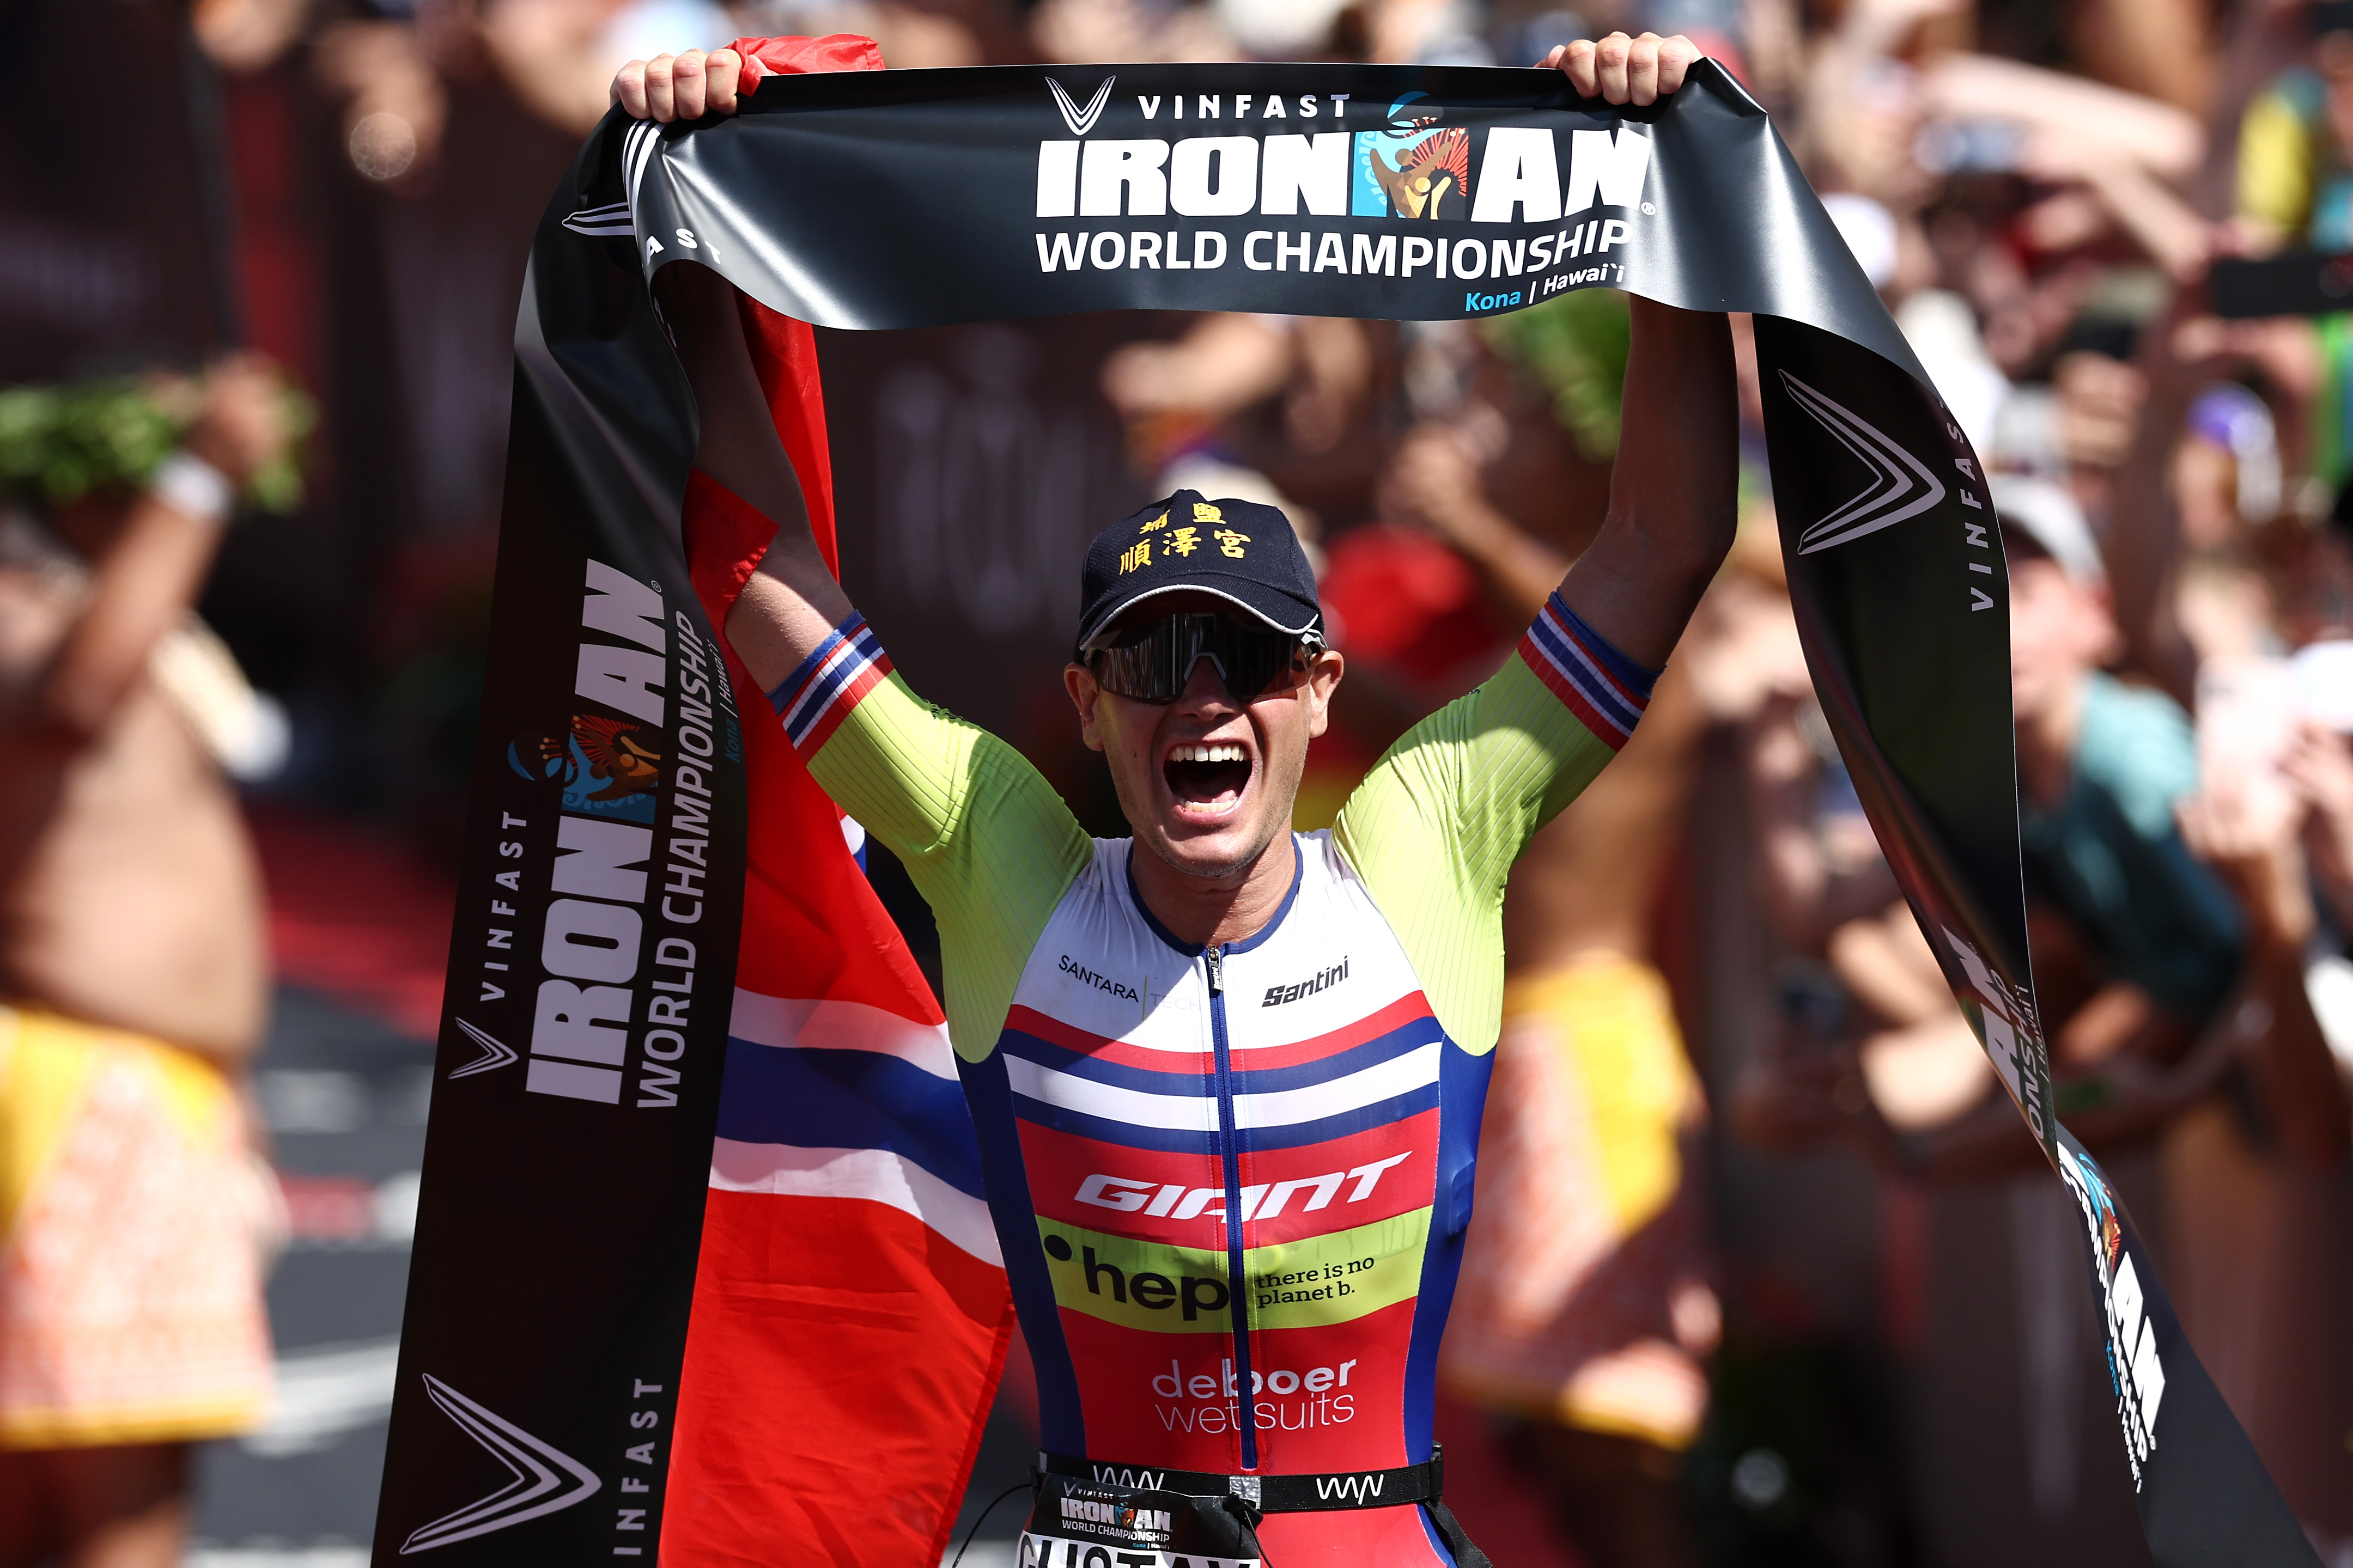 KAILUA KONA, HAWAII - OCTOBER 08: Gustav Iden of Norway celebrates after winning the IRONMAN World Championships on October 08, 2022 in Kailua Kona, Hawaii. (Photo by Tom Pennington/Getty Images for IRONMAN)